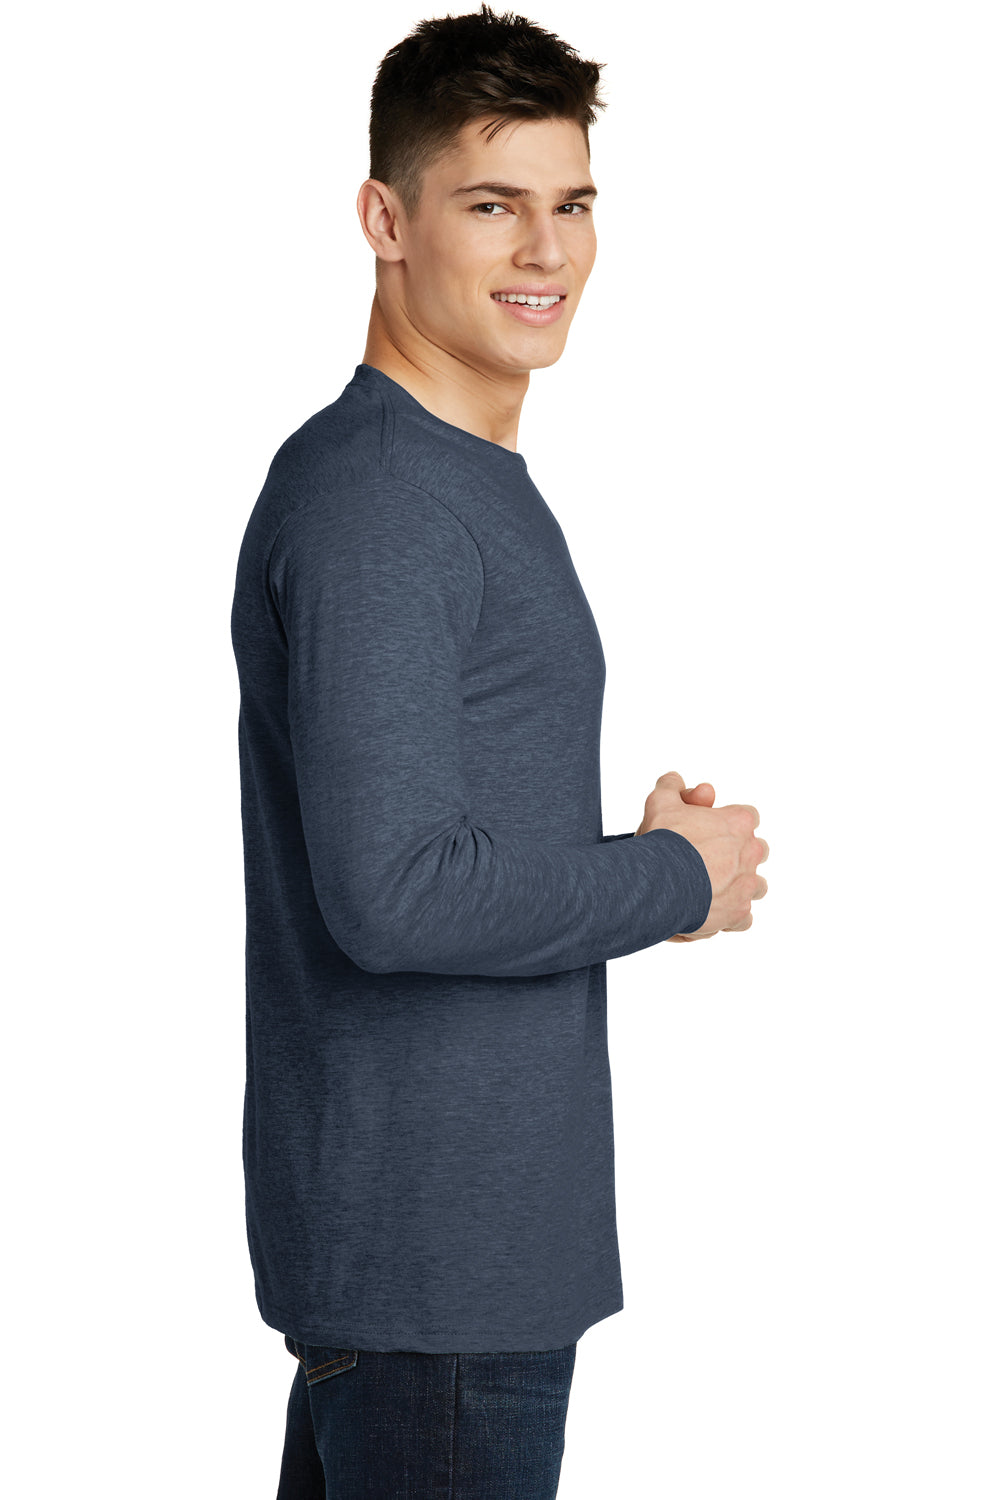 District DT6200 Mens Very Important Long Sleeve Crewneck T-Shirt Heather Navy Blue Side